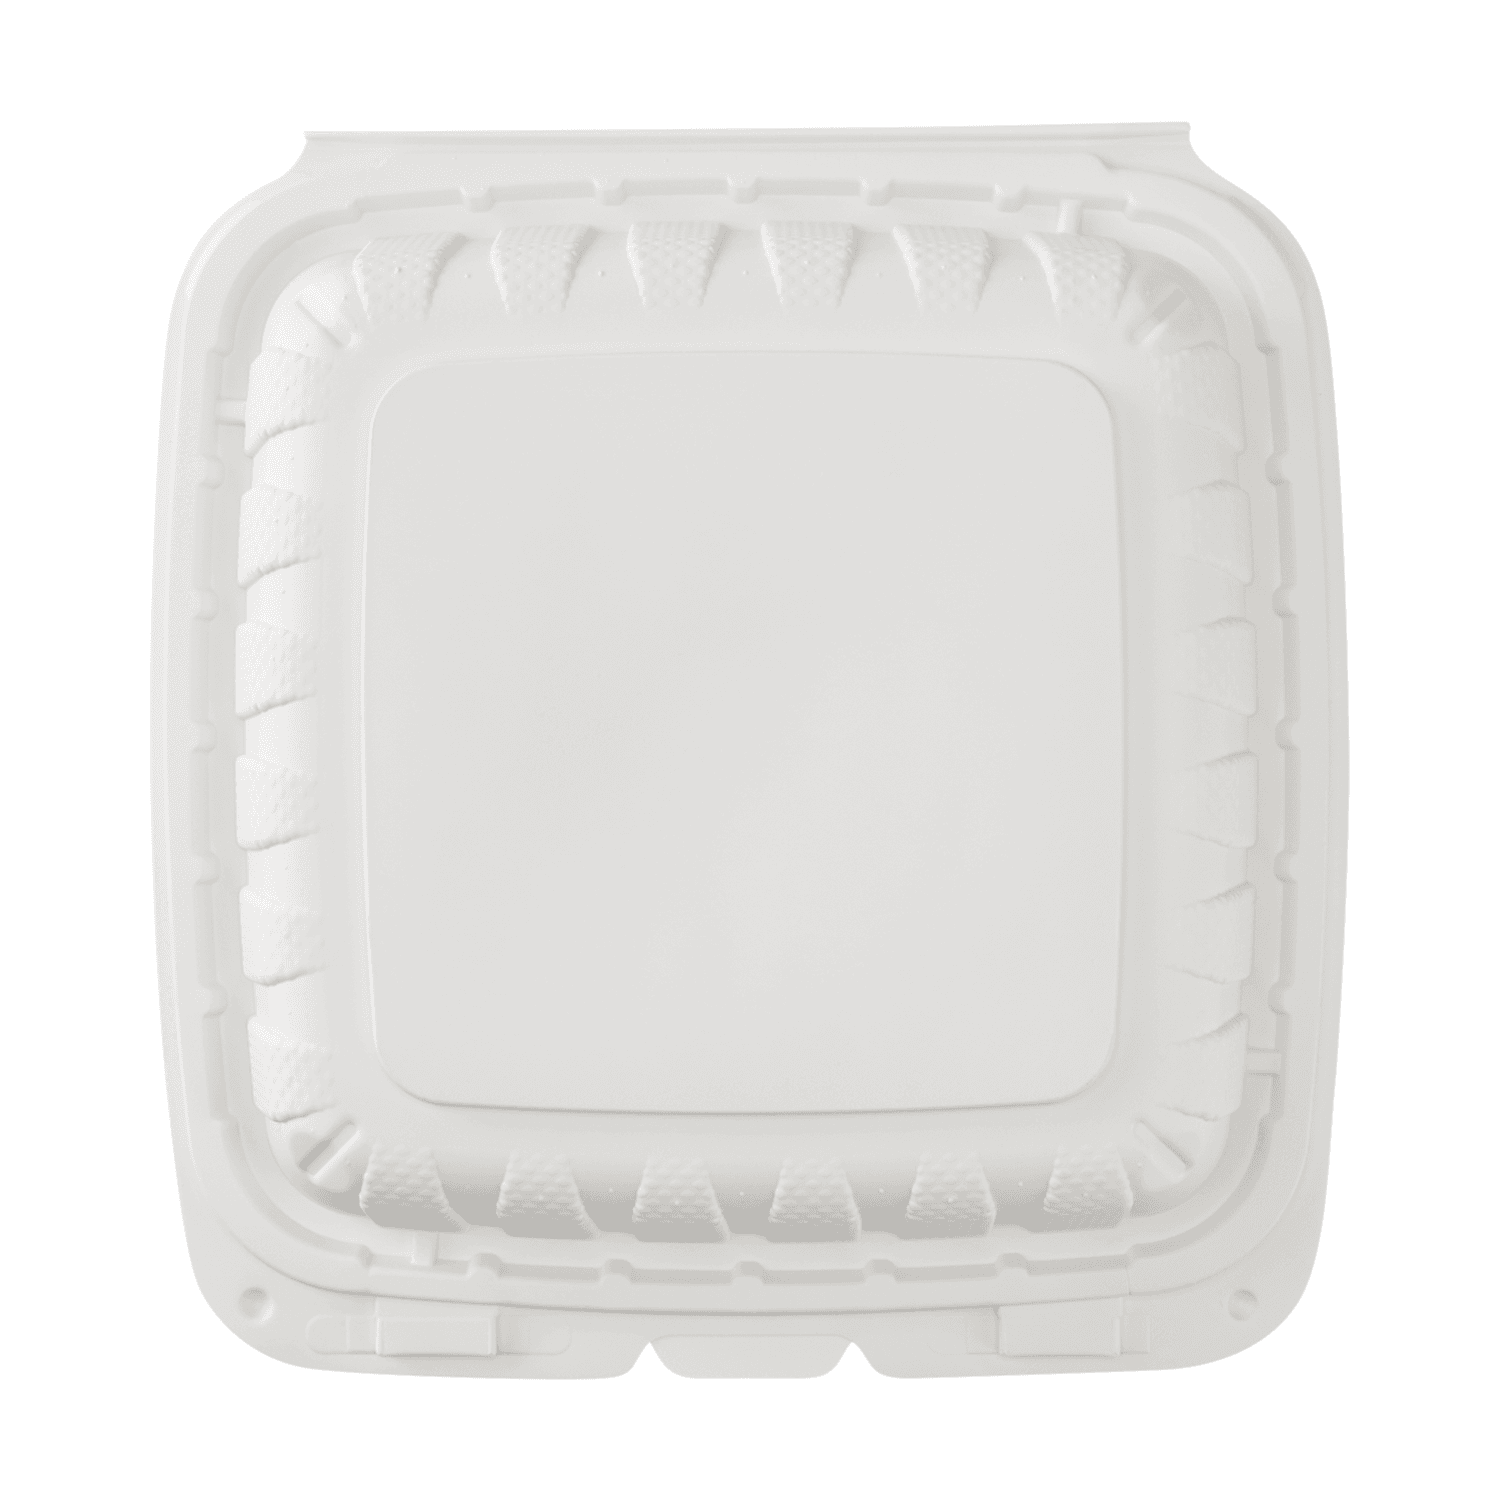 Karat Earth 8" x 8" Mineral Filled PP Hinged Container, White - 200 pcs